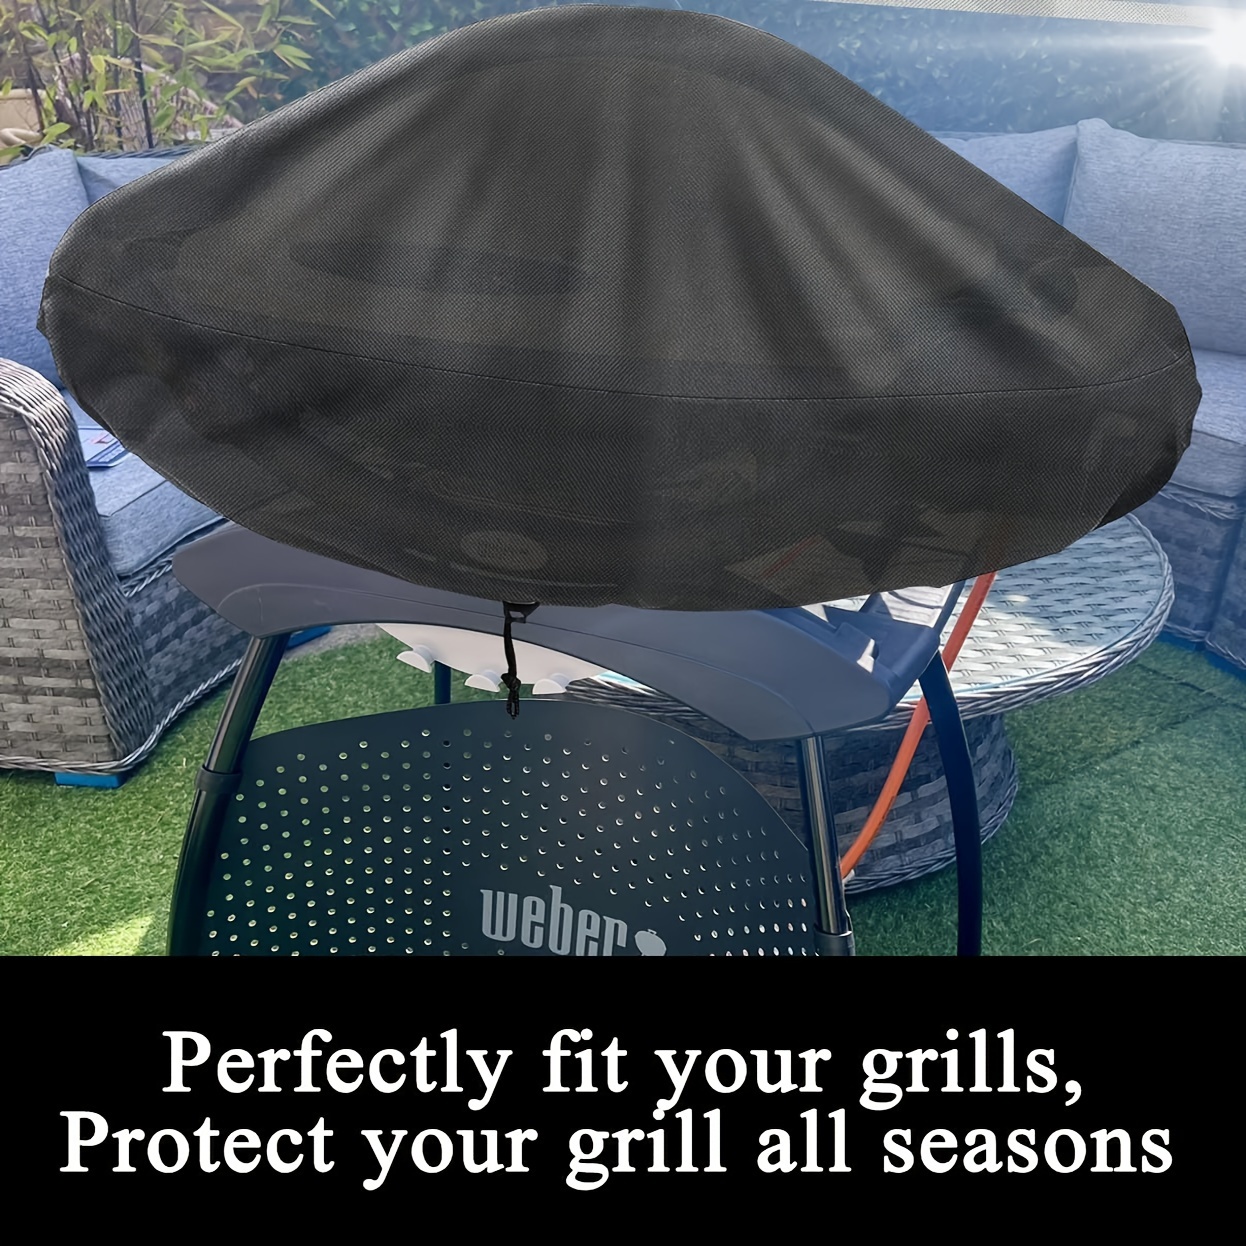 

1pc 210t Warterproof Fabric Grill Cover For Weber Q1000 & Q2000 For Rv Outdoor Cooking Backyard Garden Camping Picnics Beach Bbq Tools, Bbq Accessories, Grill Accessories